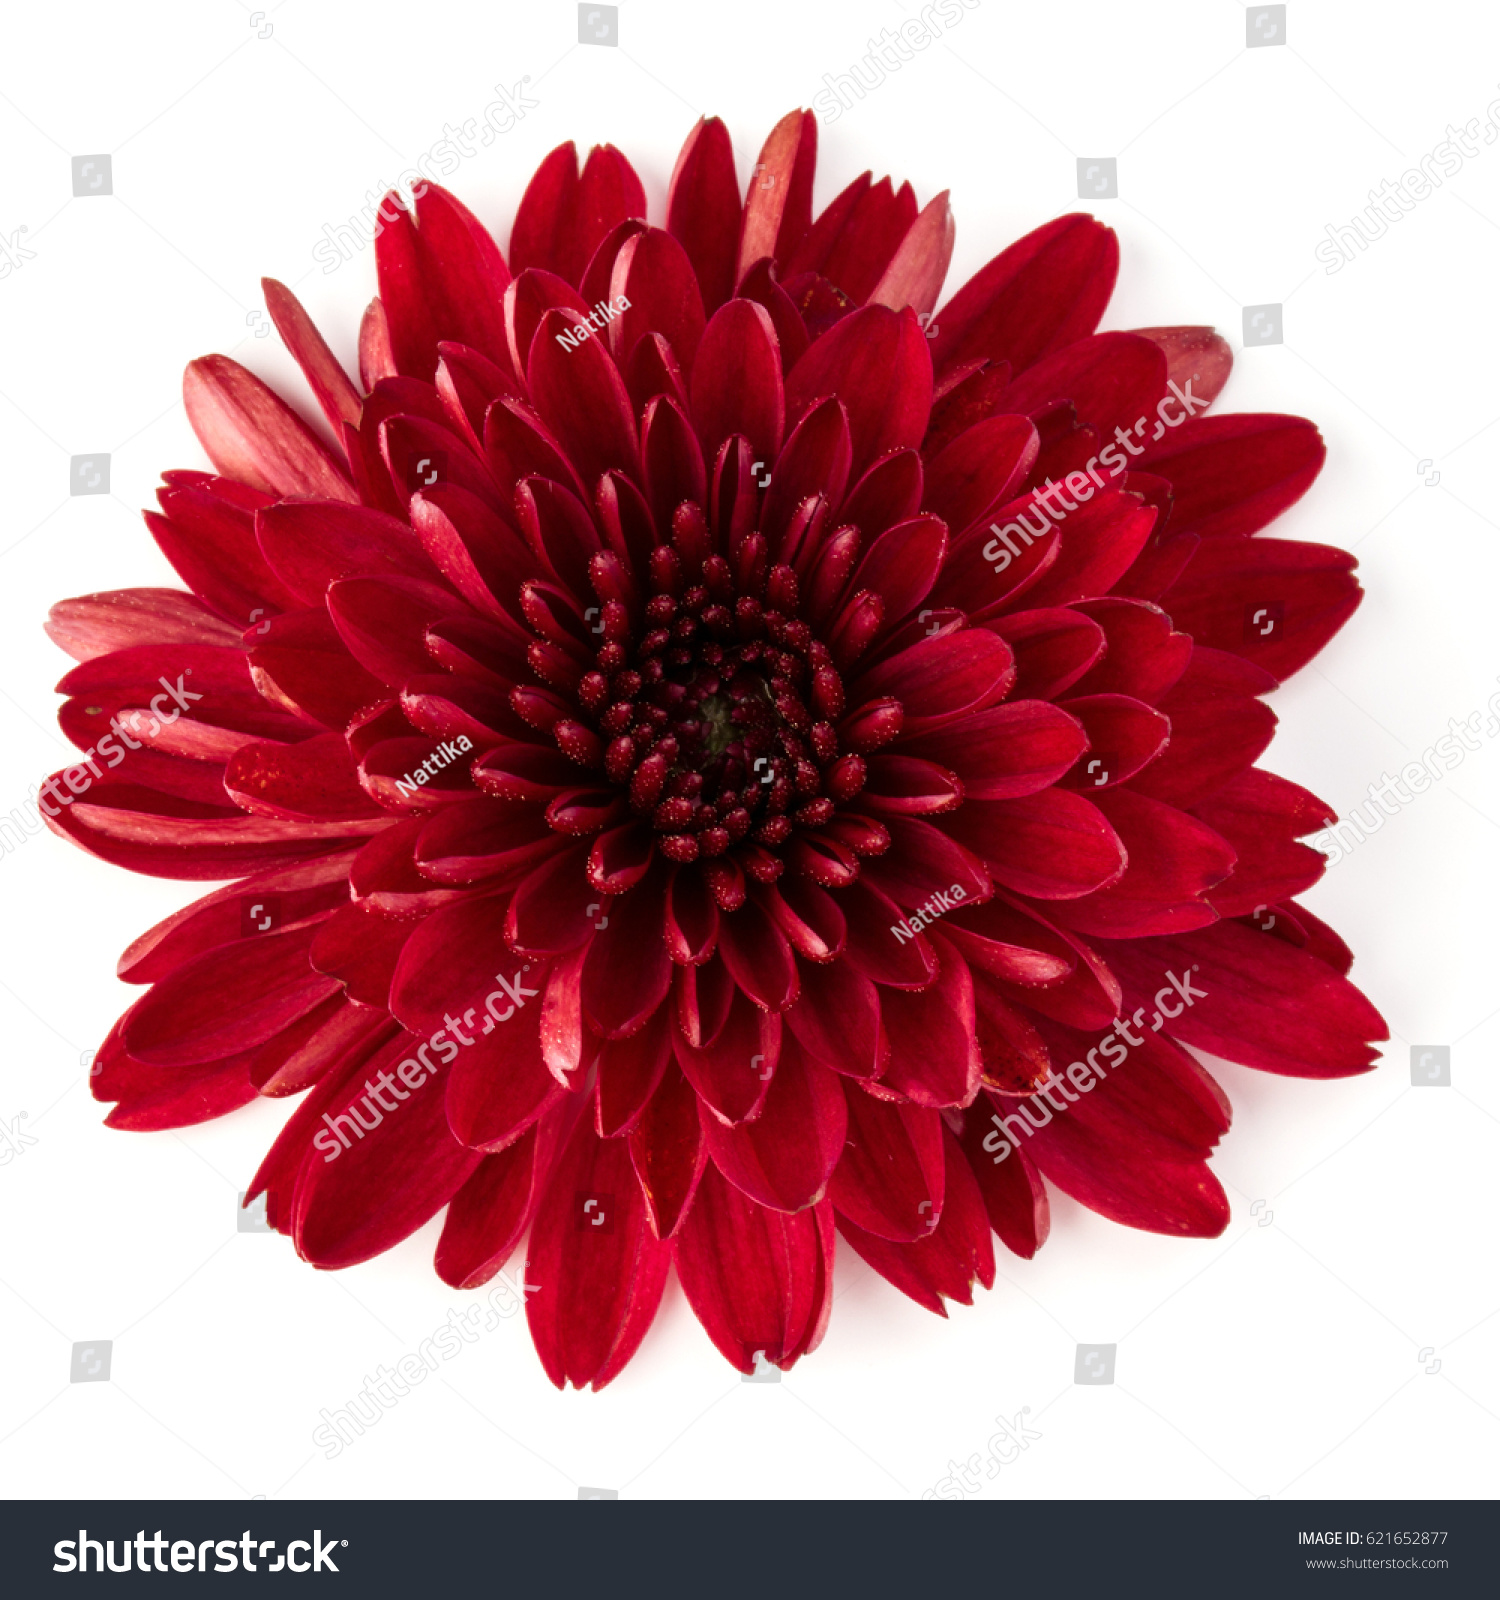 Red chrysanthemum flower isolated on white background #621652877